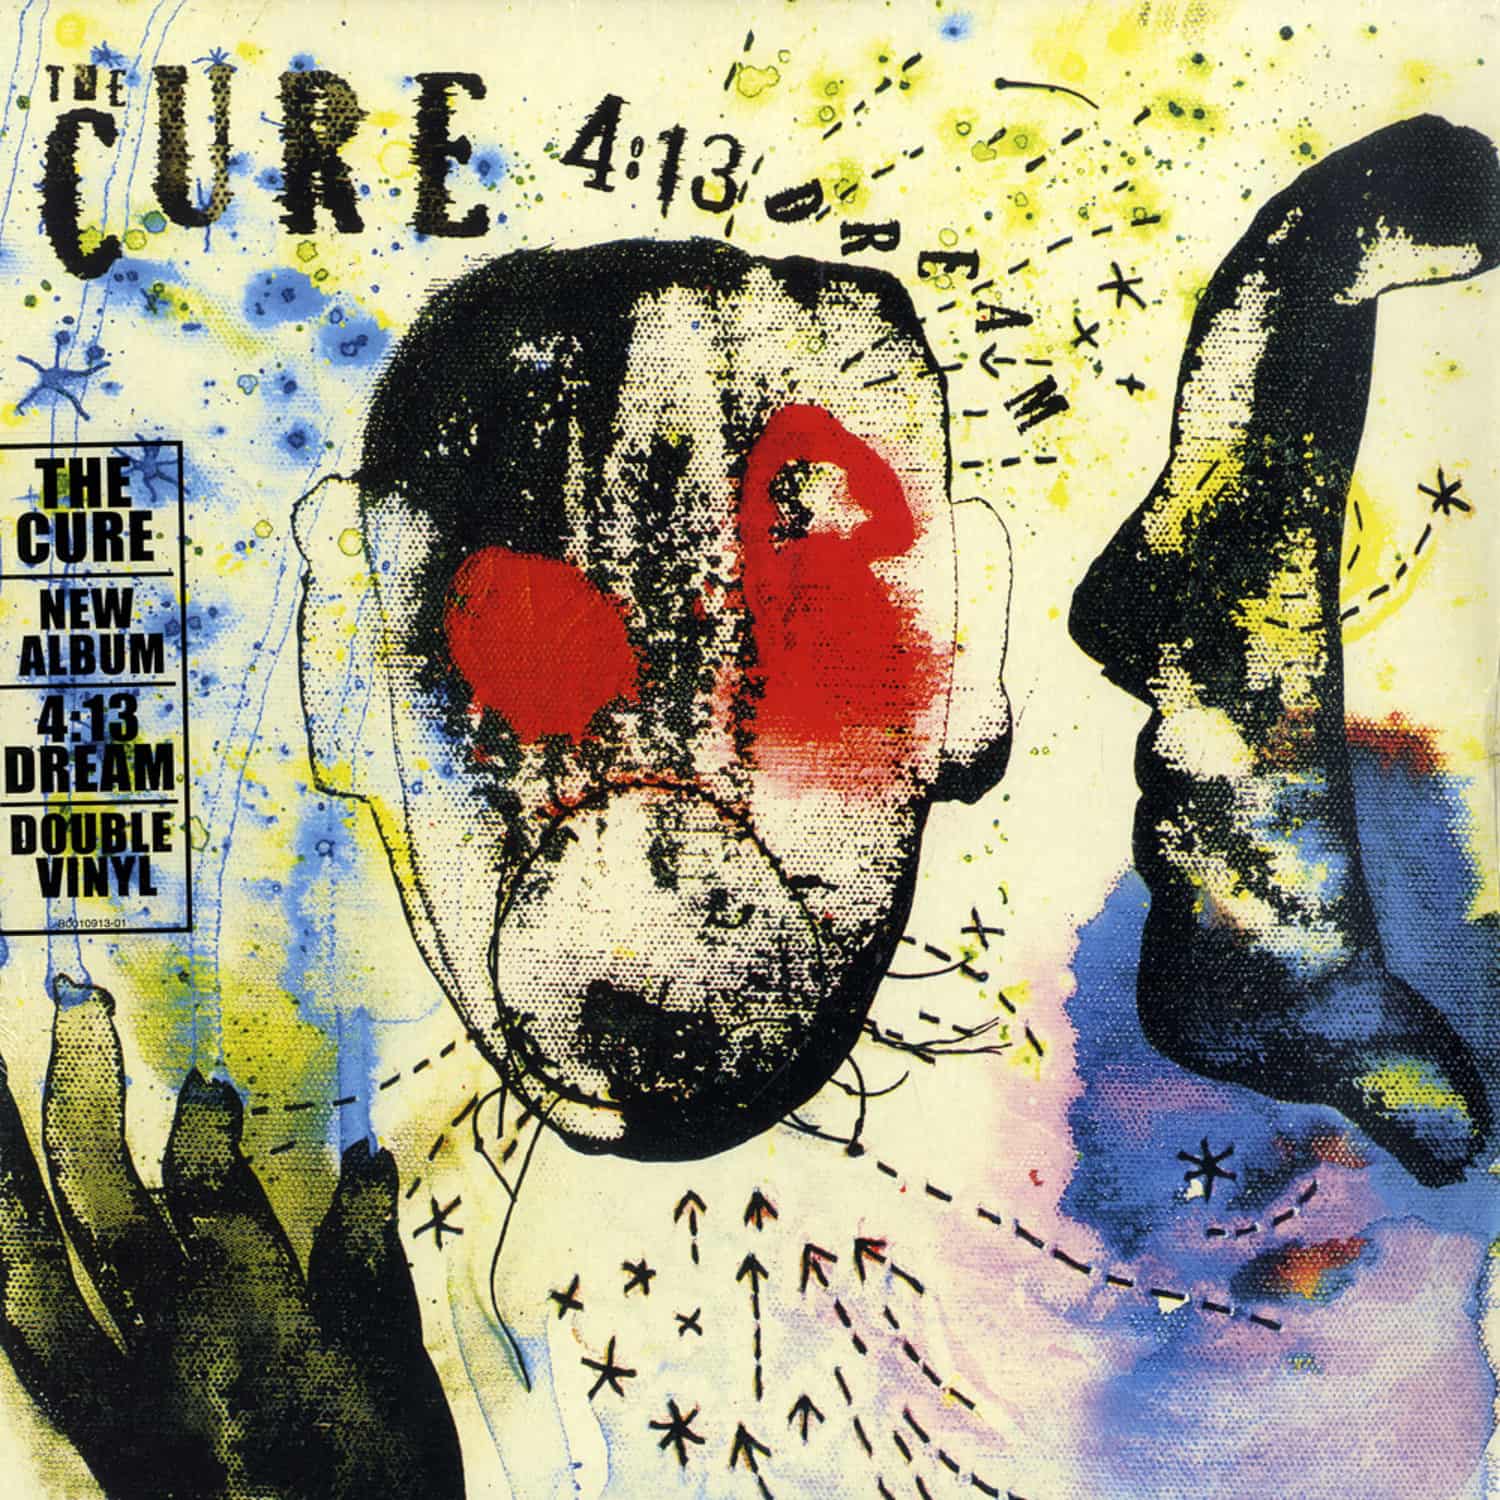 The Cure - DREAM 